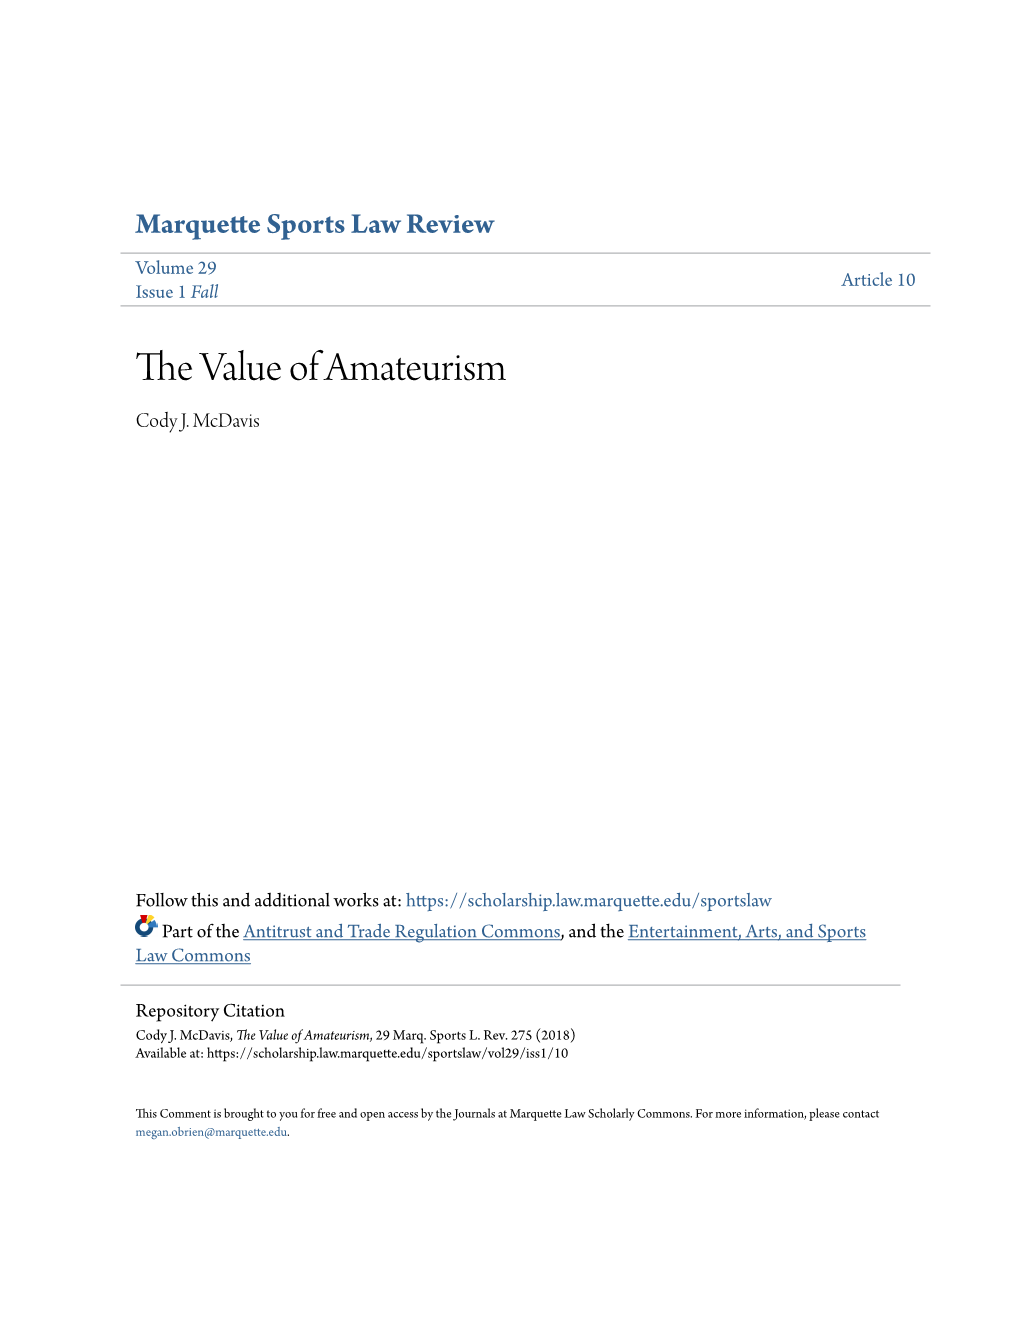 The Value of Amateurism, 29 Marq